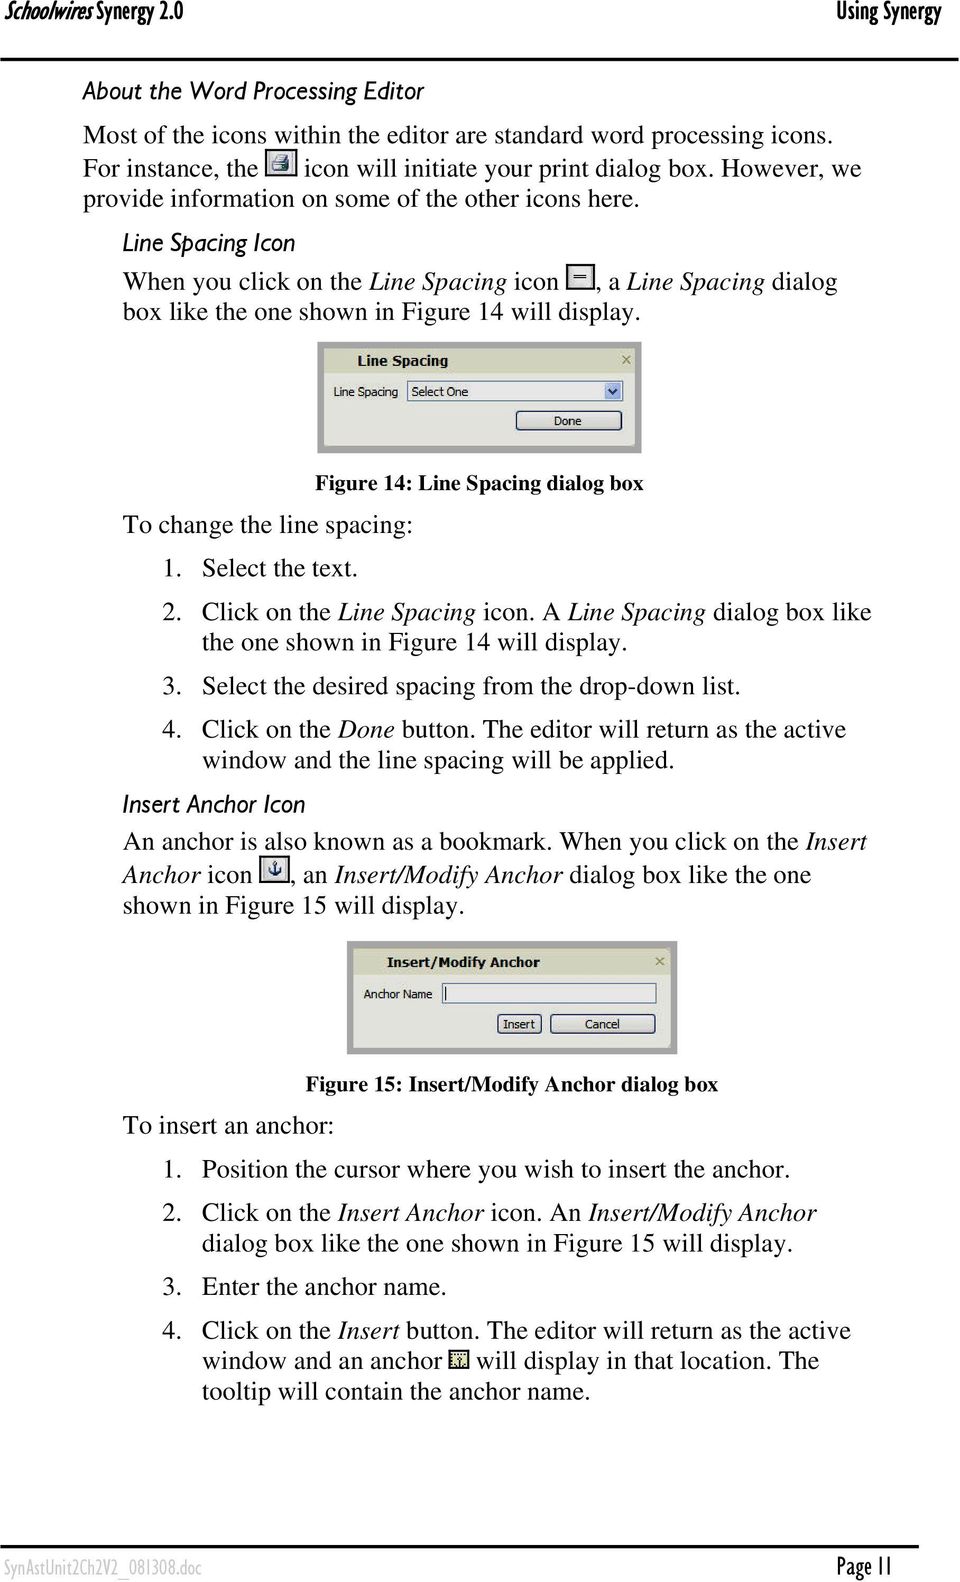 Figure 14: Line Spacing dialog box To change the line spacing: 1. Select the text. 2. Click on the Line Spacing icon. A Line Spacing dialog box like the one shown in Figure 14 will display. 3.